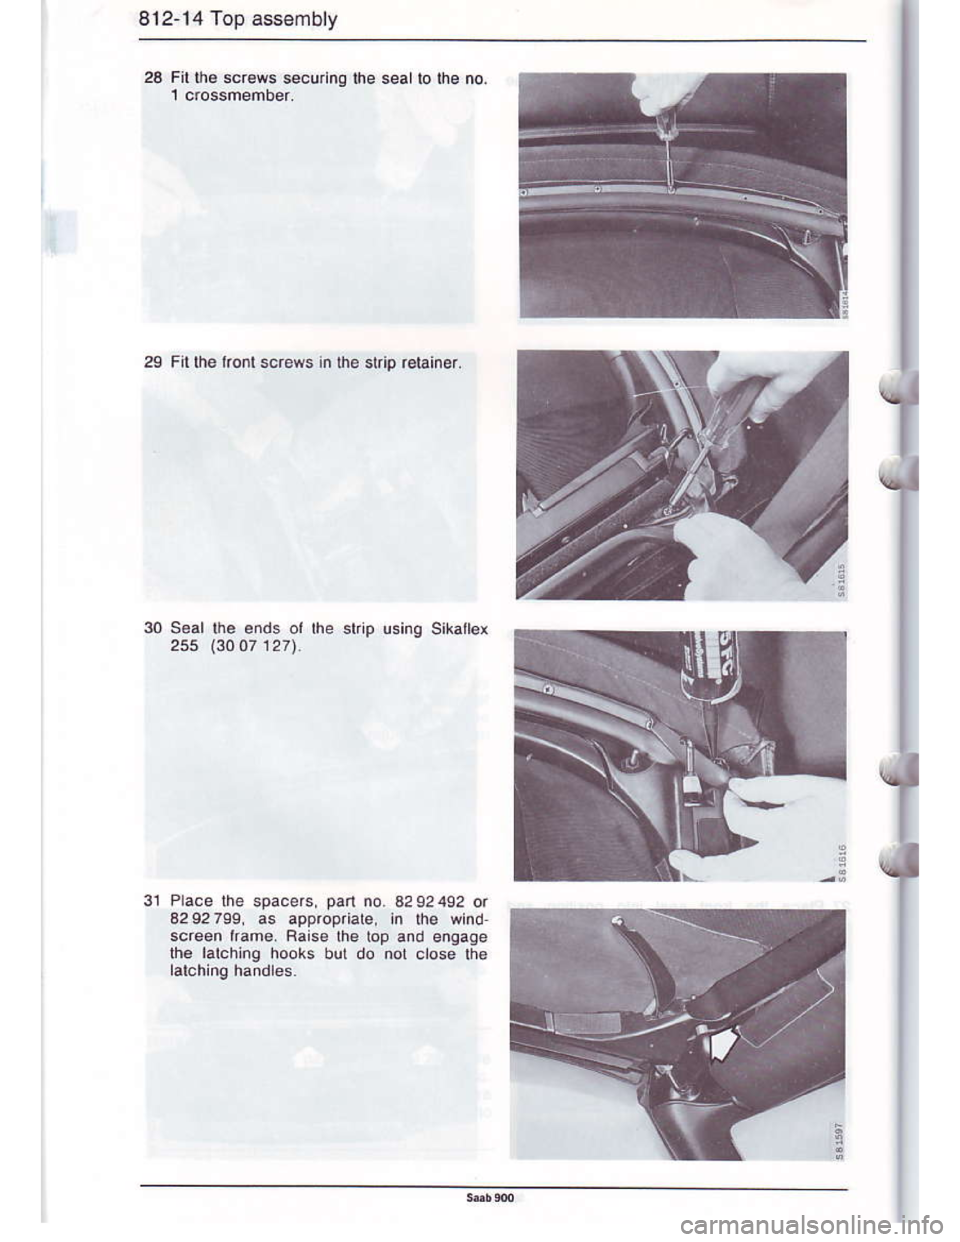 SAAB 900 1986 Owners Guide Downloaded from www.Manualslib.com manuals search engine 8t2-14 Top assembly
28 Fil ols scr€ws securlnO |ne sealto lhe no.
29 Flllhe ko scr€ws in the strip r€tainer.
30 S€al [h. ends ol the st